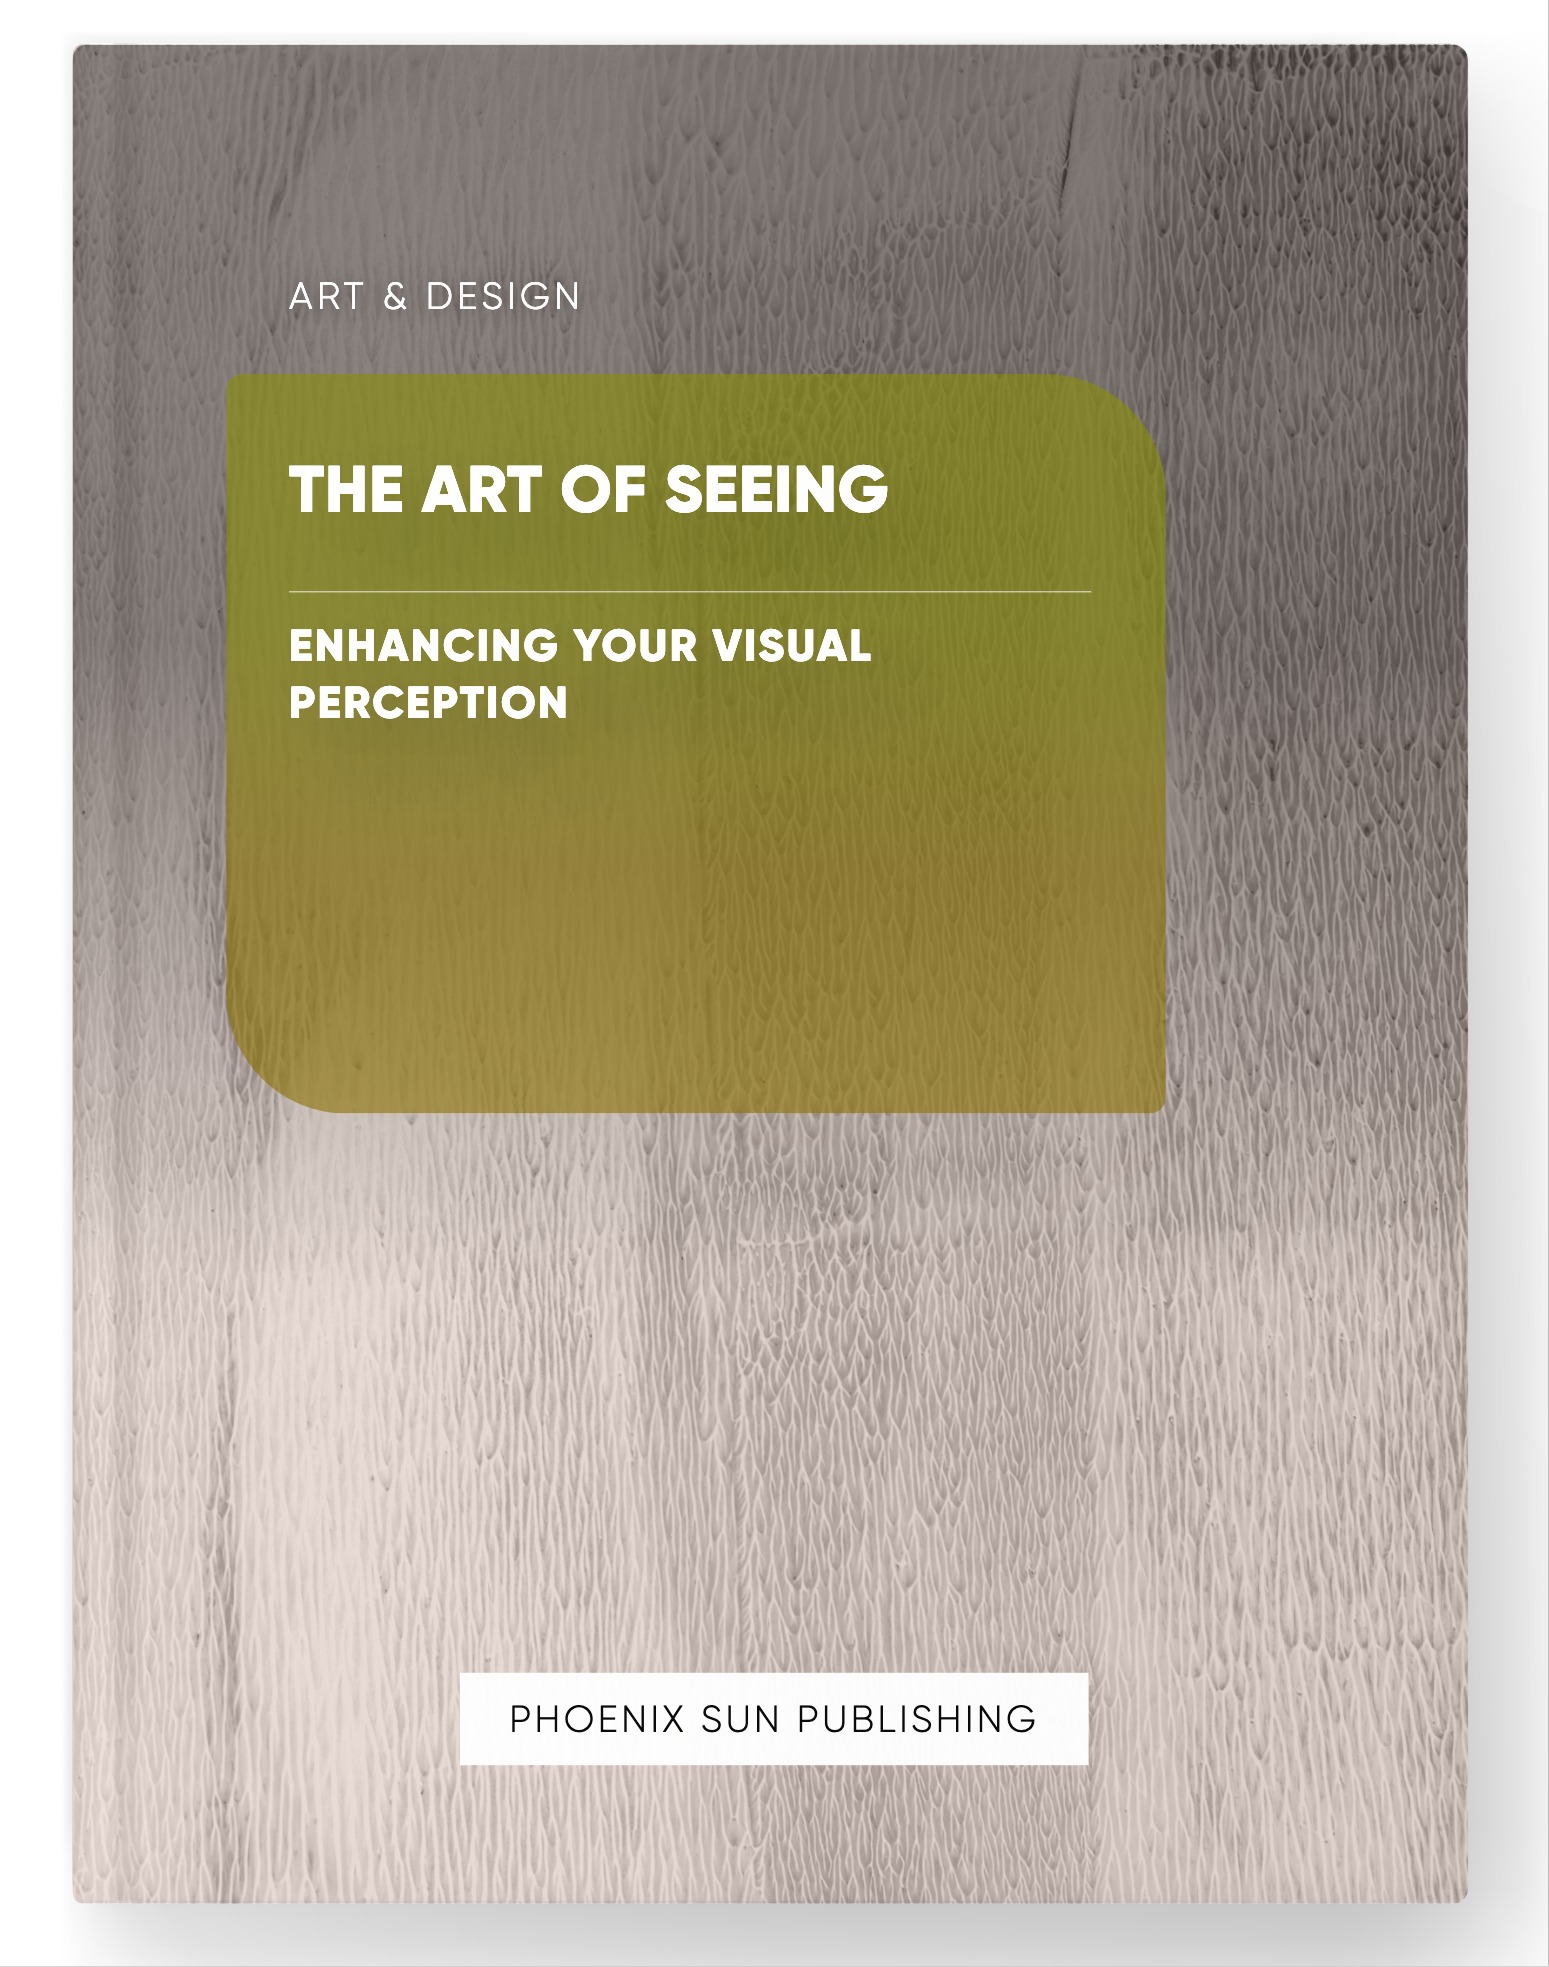 The Art of Seeing – Enhancing Your Visual Perception